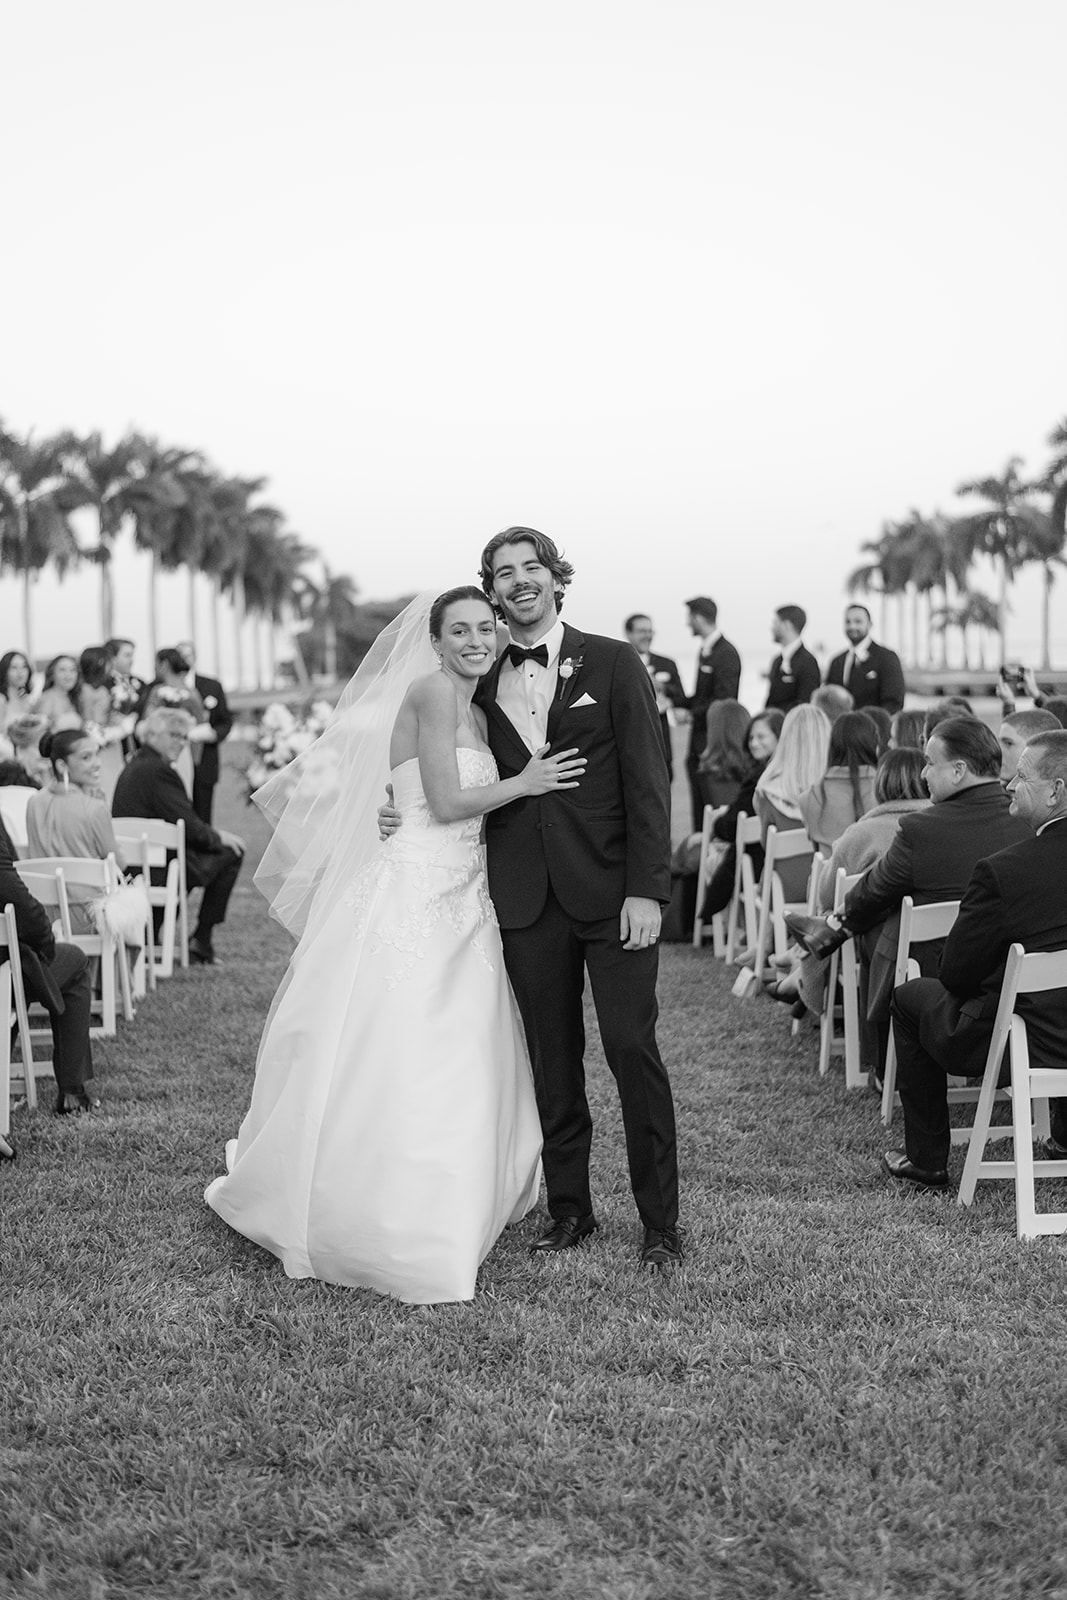 Memories to last a lifetime: Bales & Shelby's Deering Estate Wedding Photography in Miami Florida
